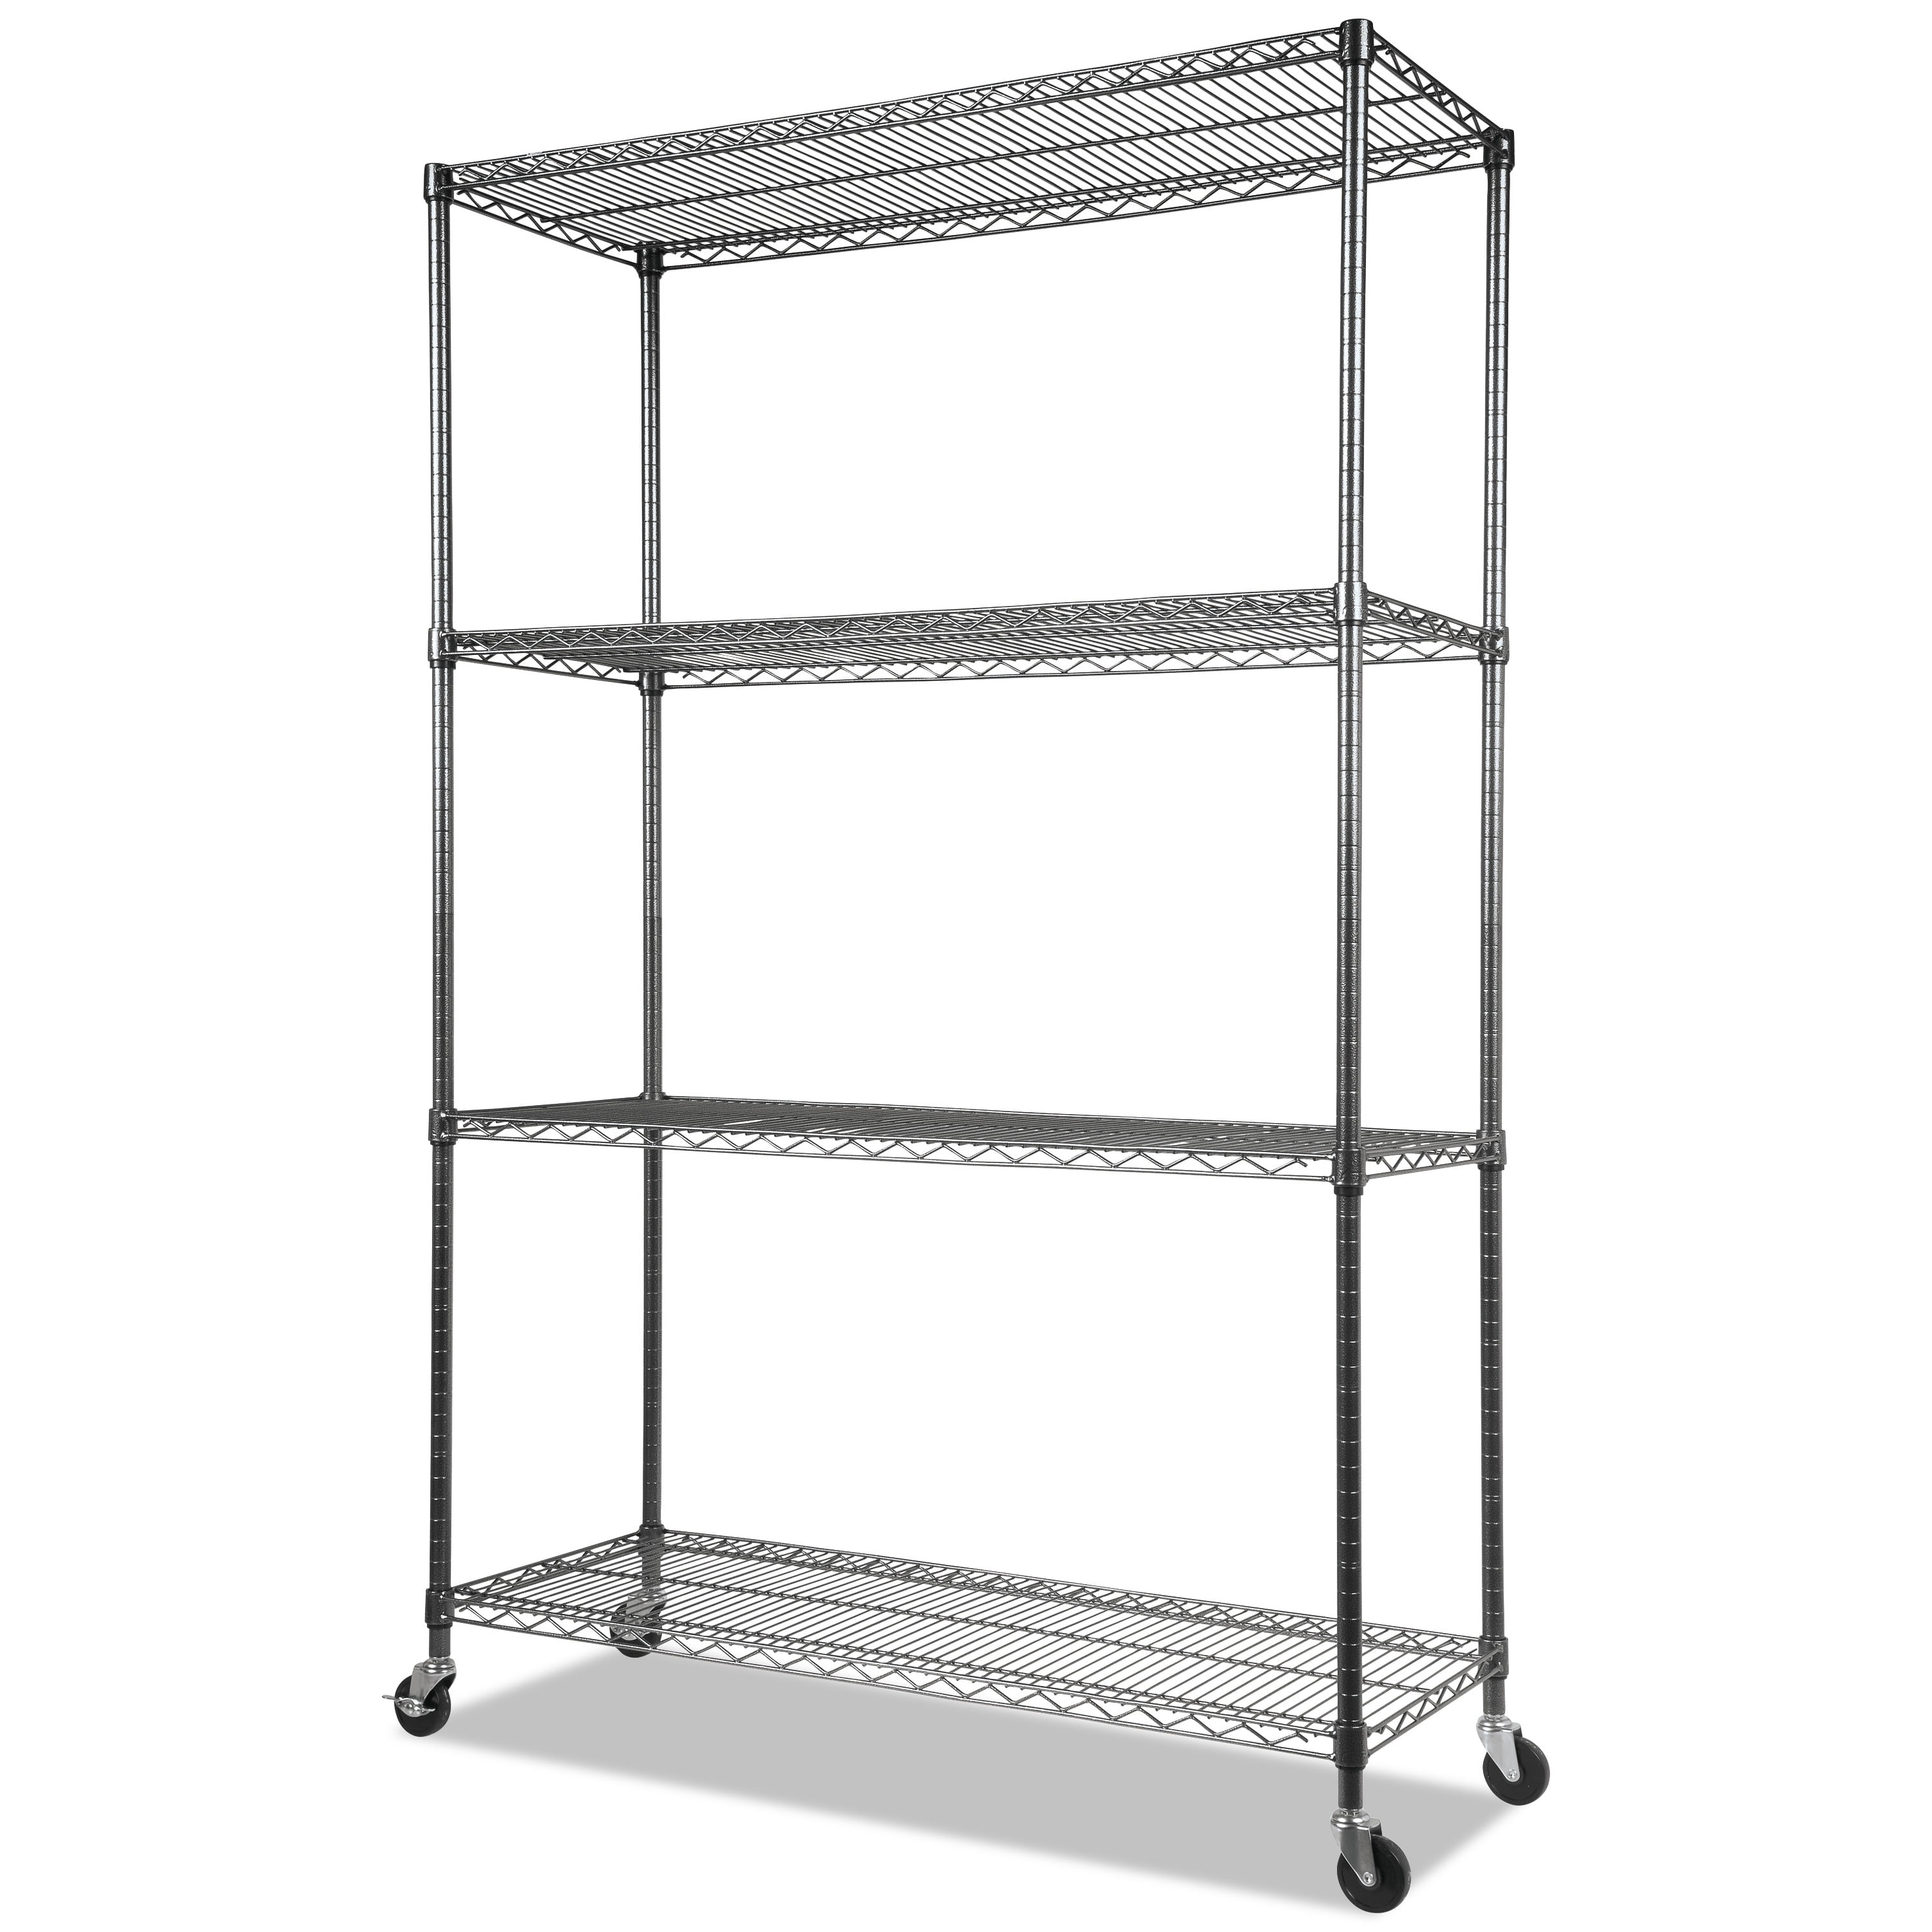 Wire Shelving Unit With Casters, Wheels For Shelving Units